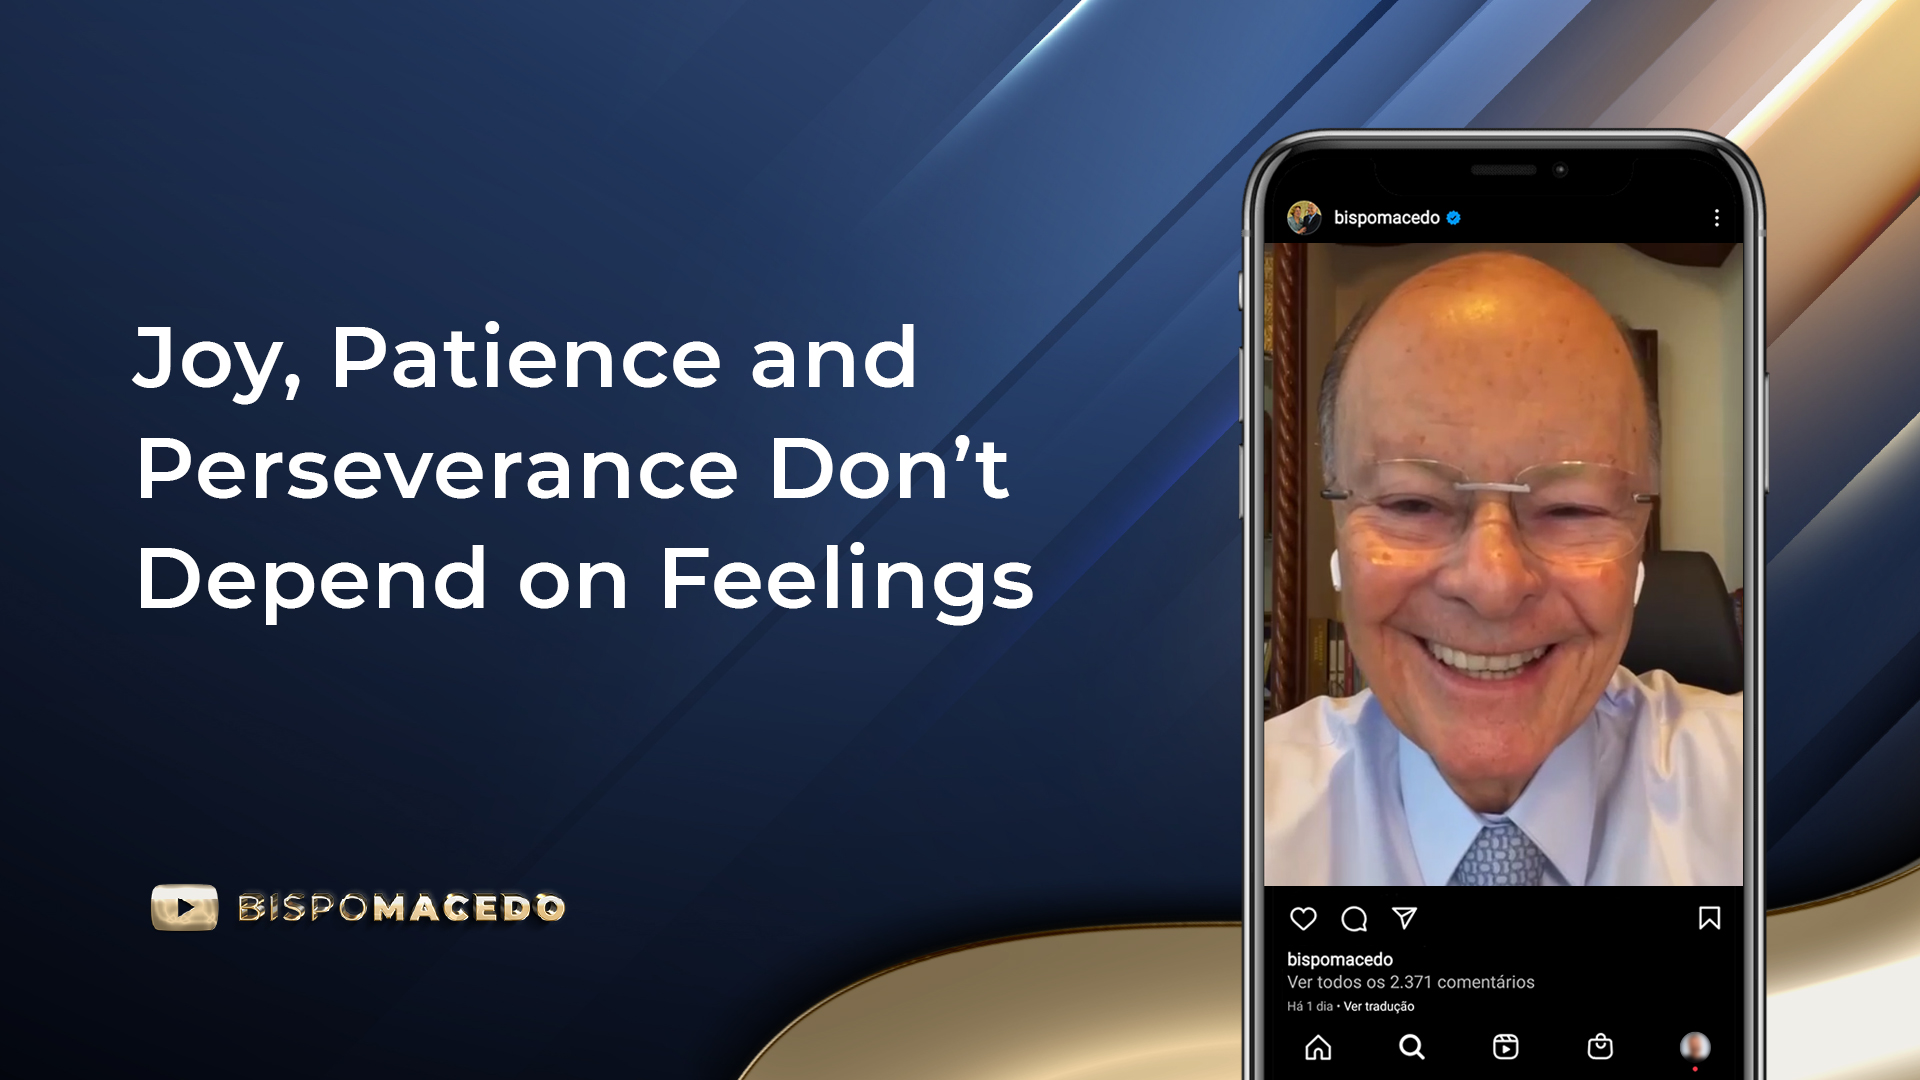 Joy, Patience and Perseverance Don't Depend on Feelings